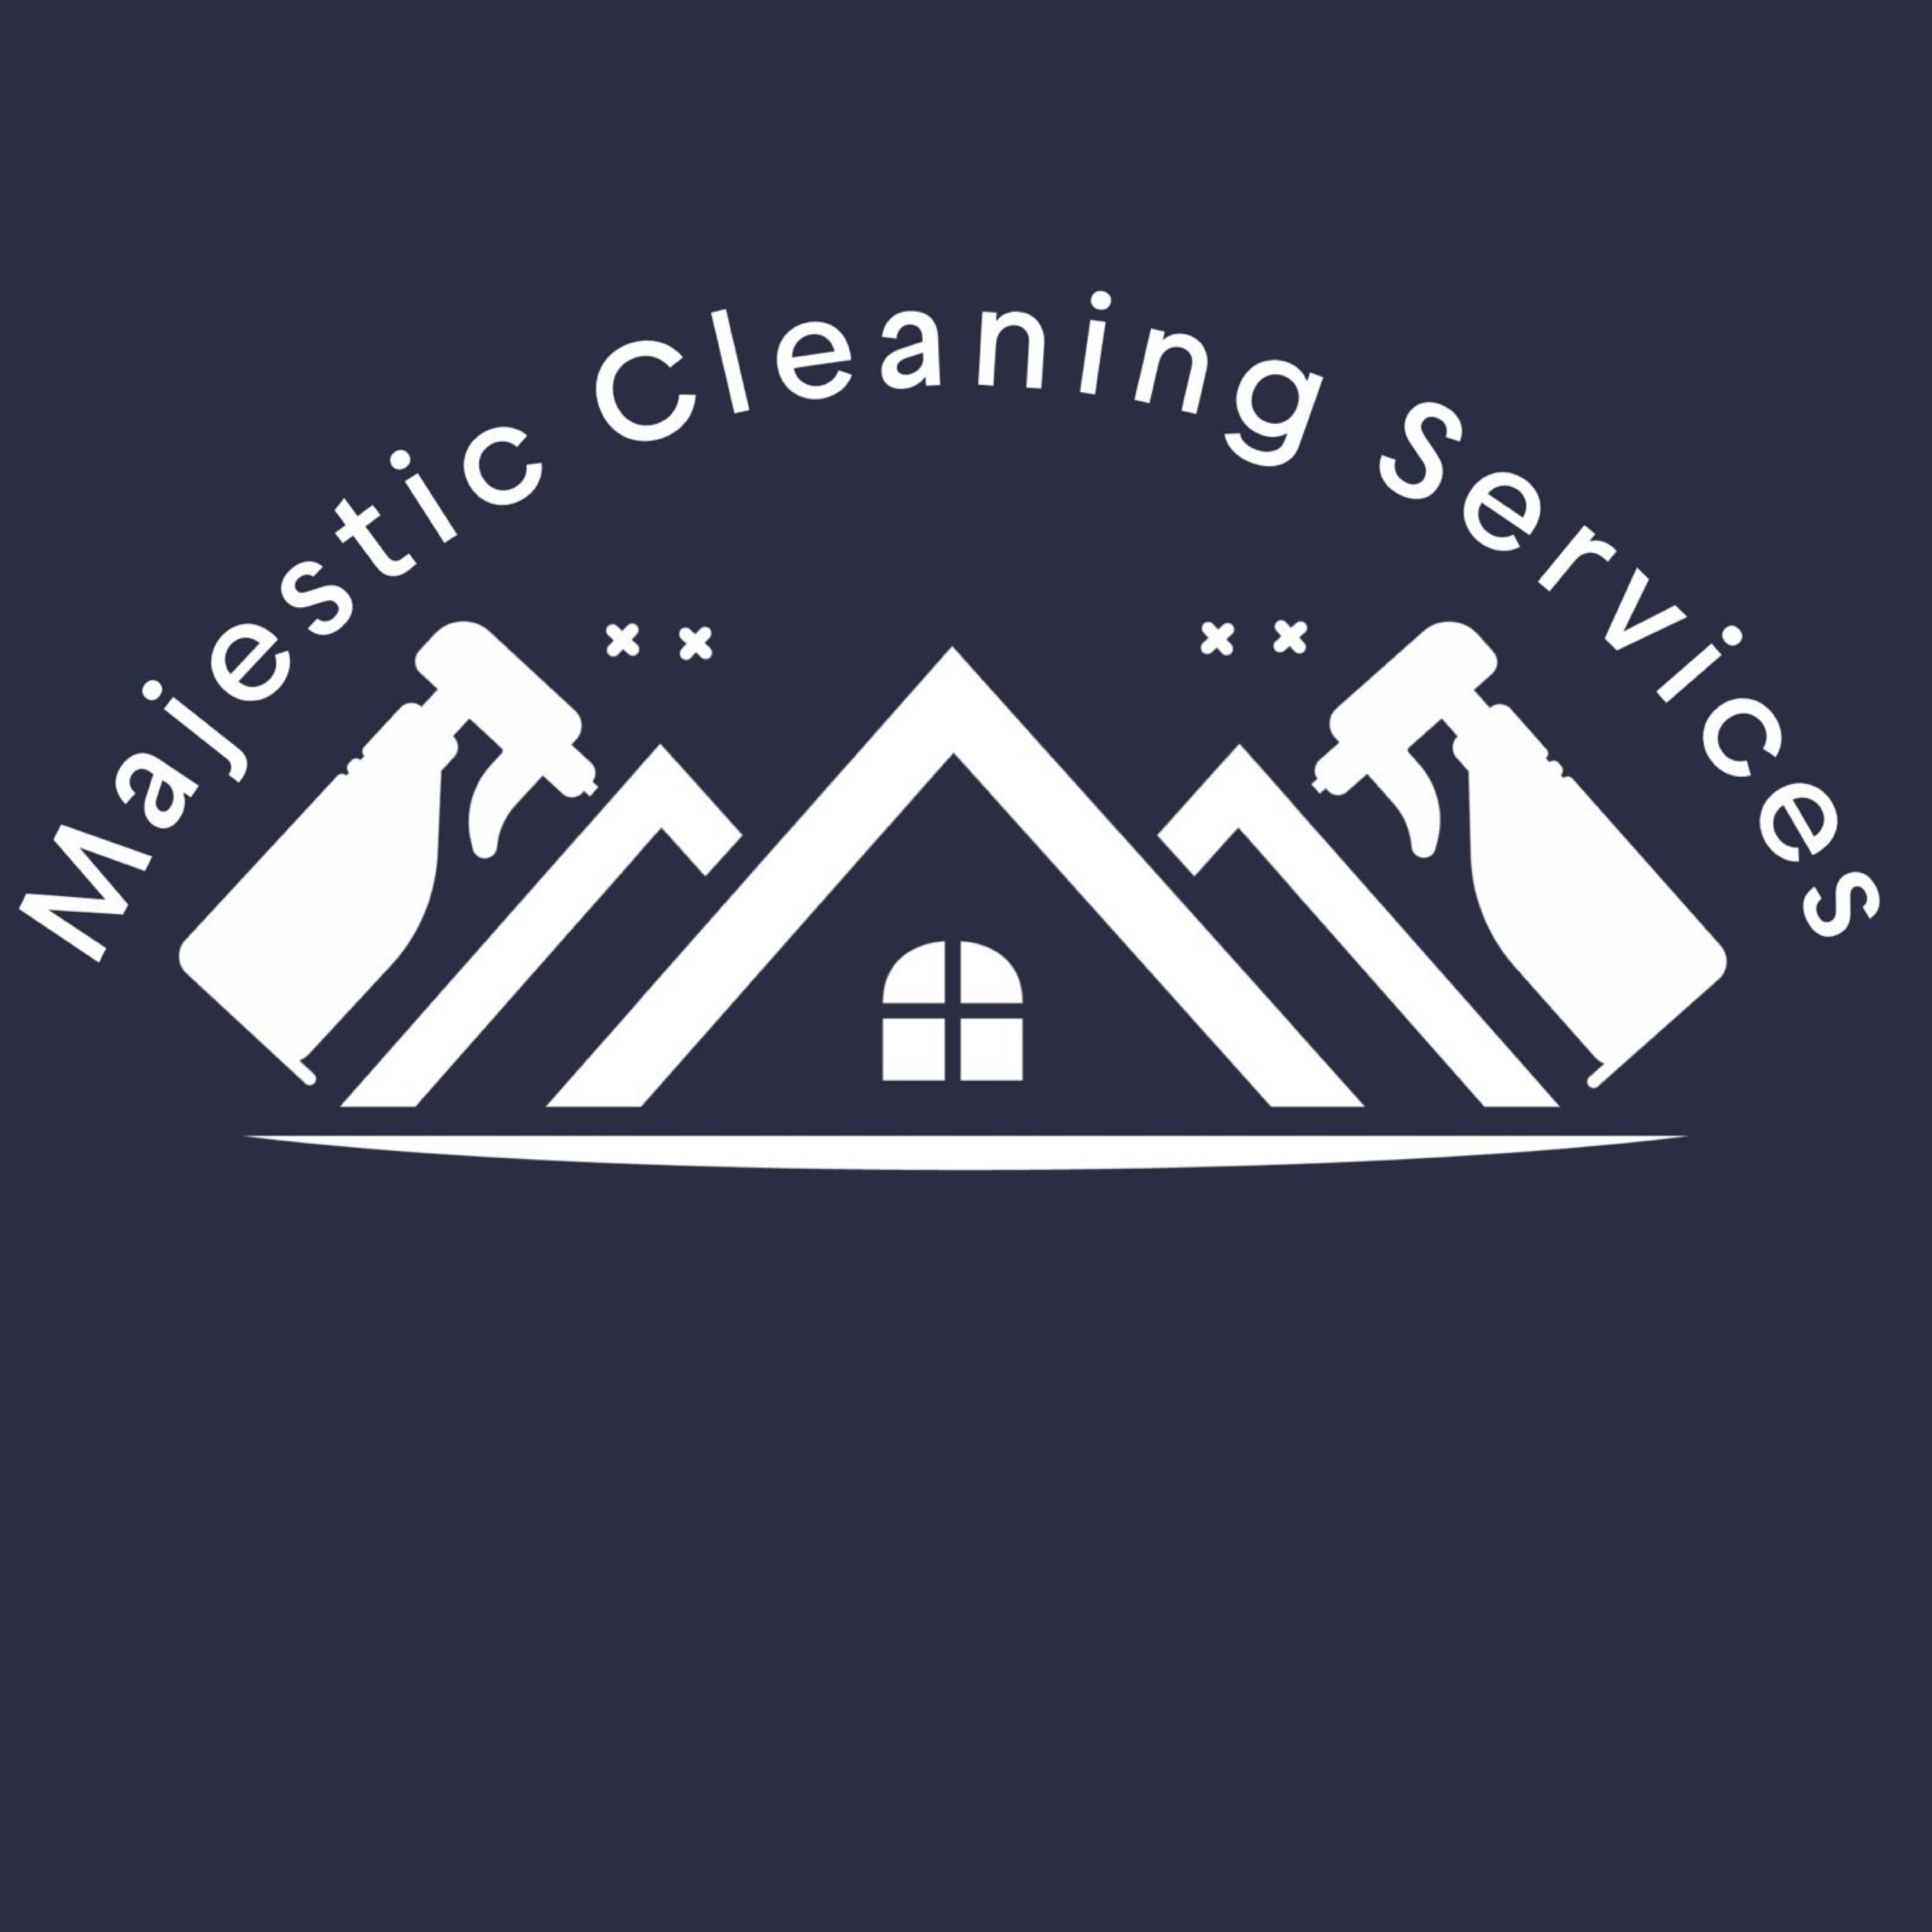 Majestic Cleaning Services Logo